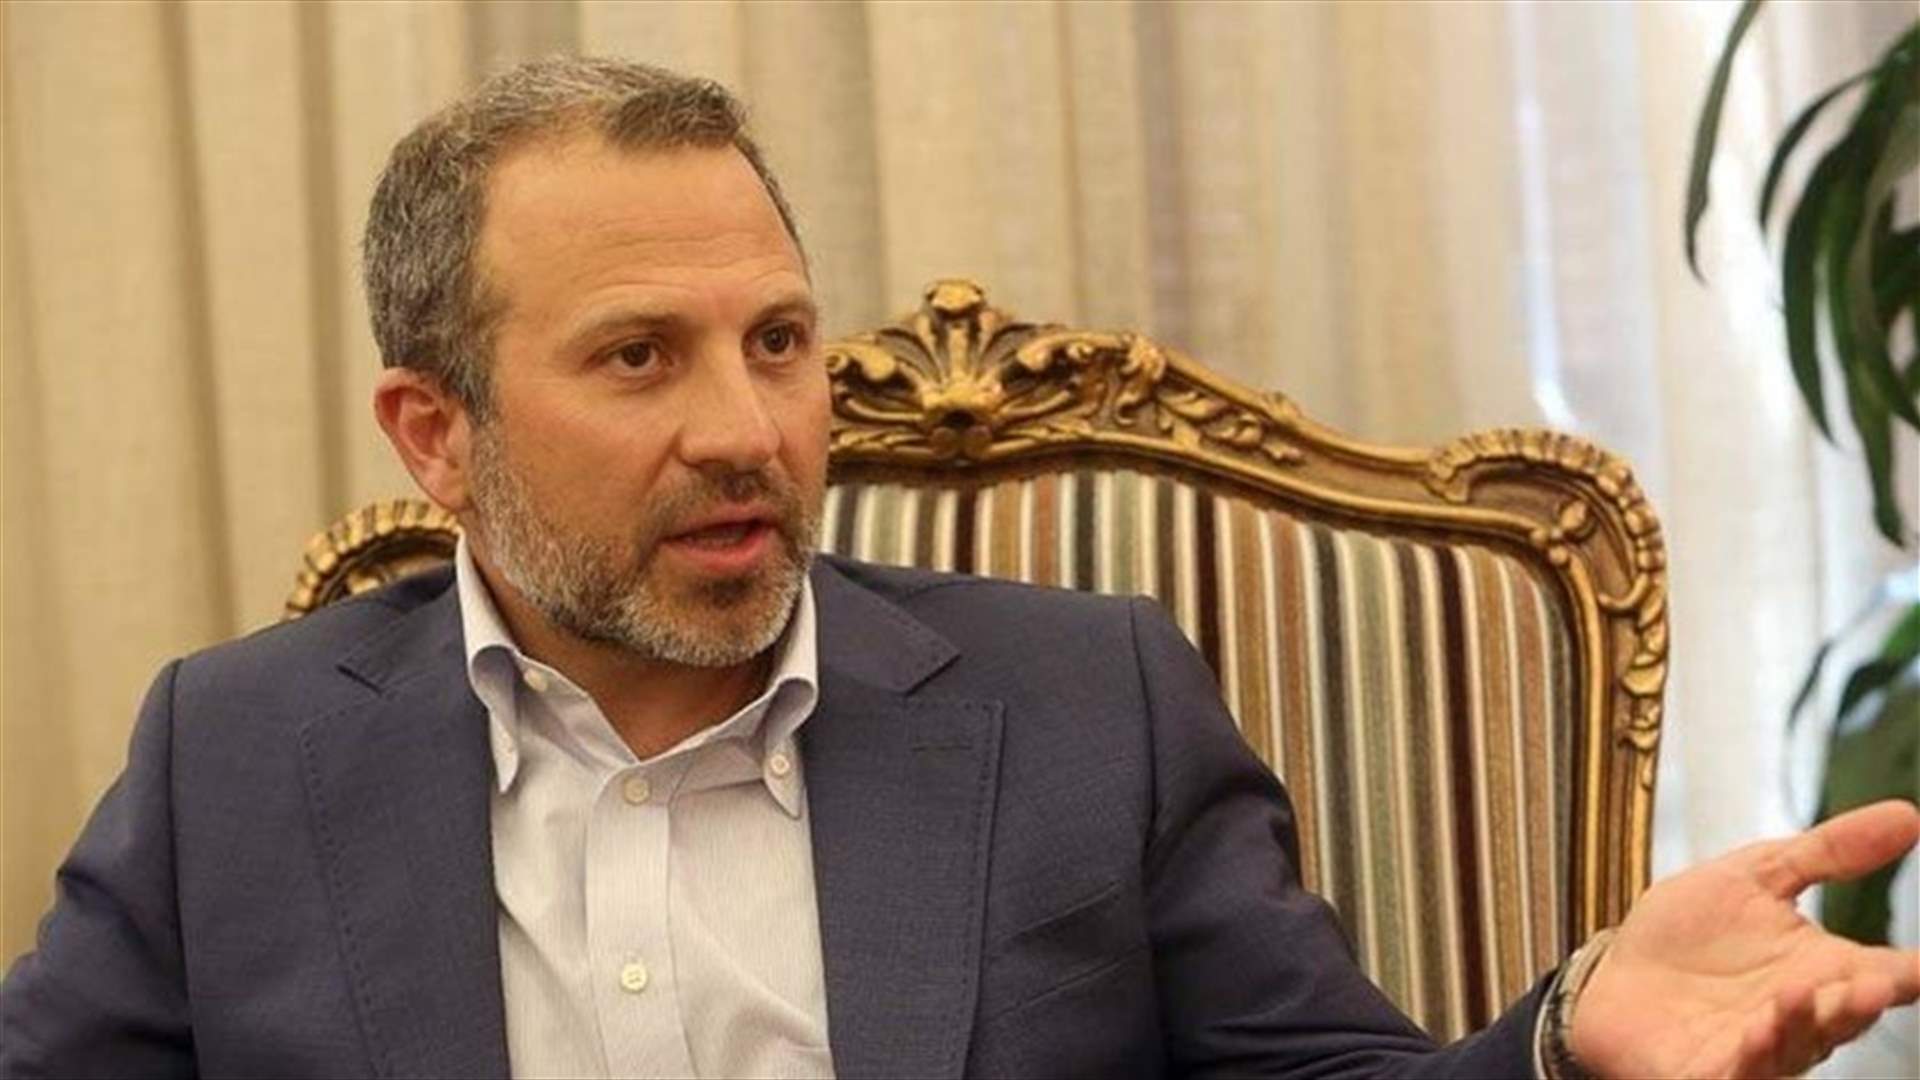 Following Rifi’s press conference, Bassil calls for taking appropriate judicial measures against him